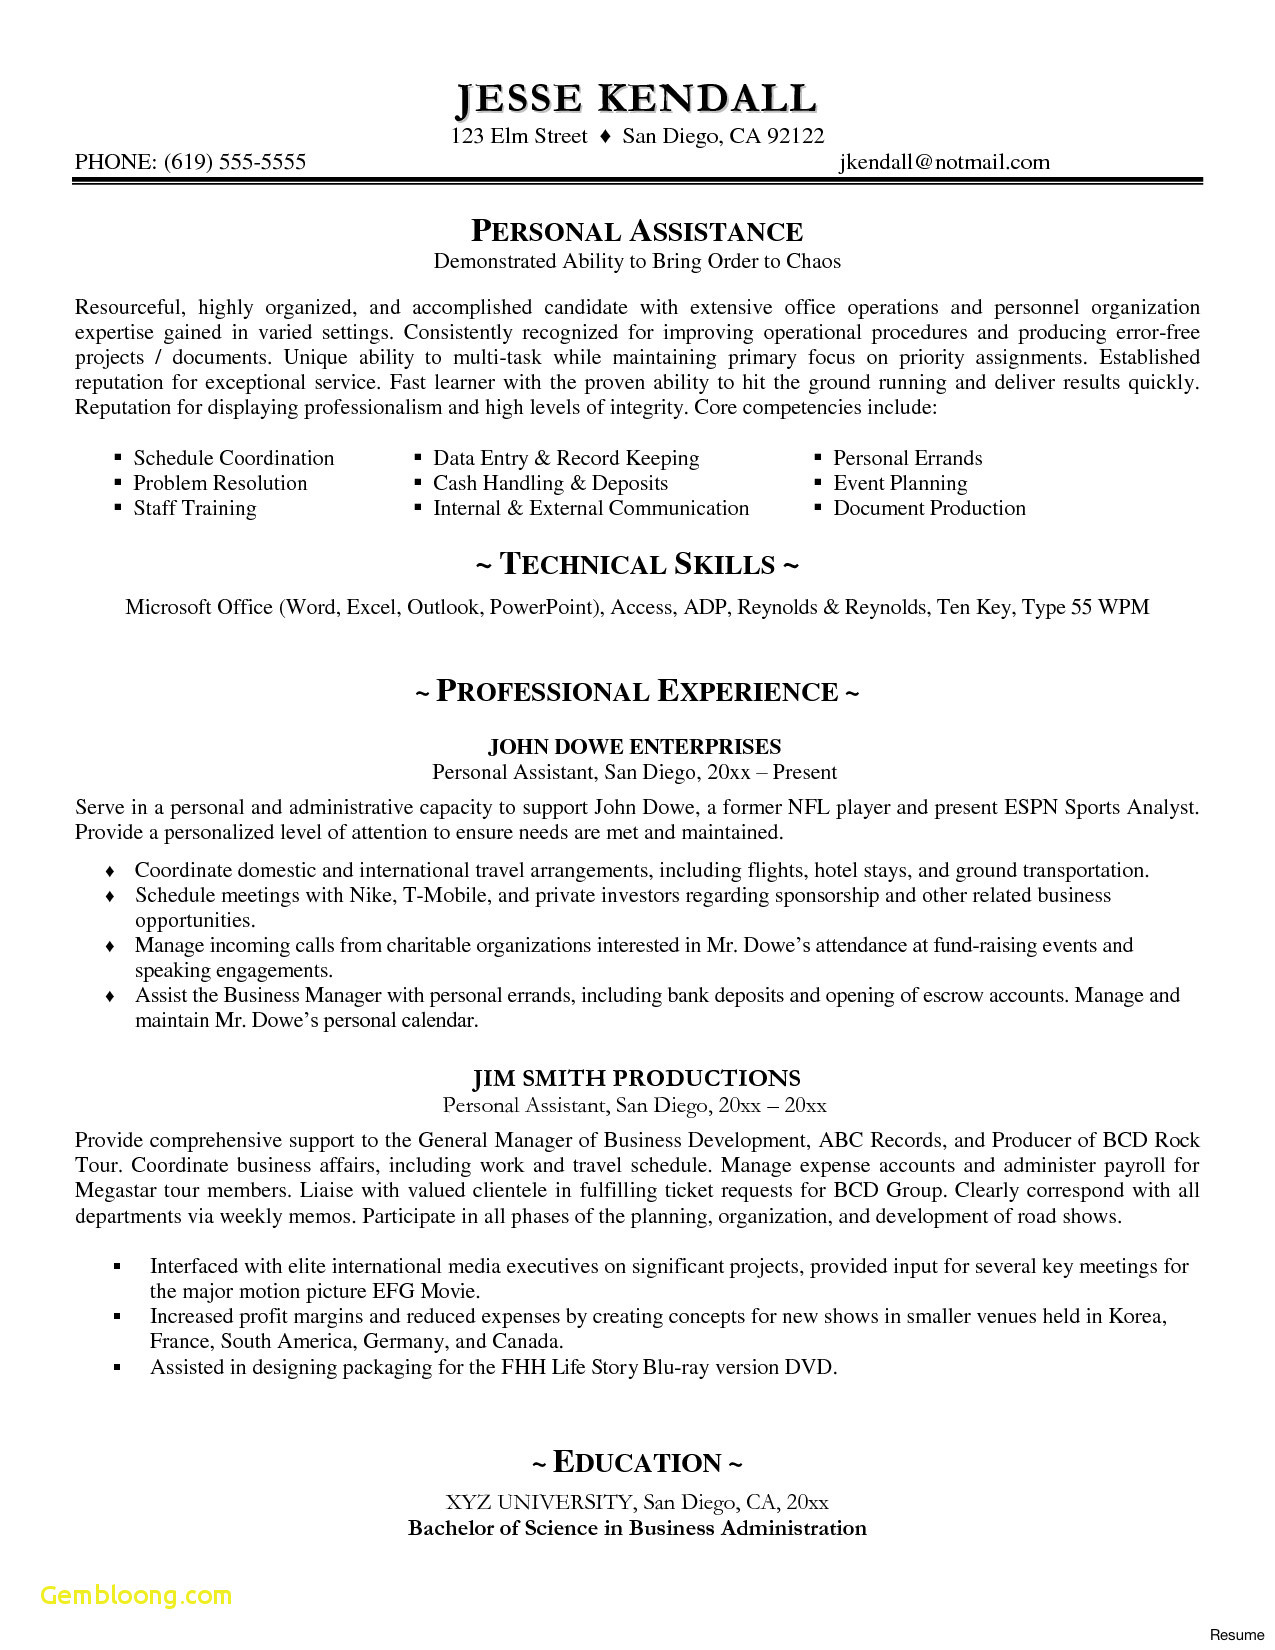 Cover Letter Template Word Free Download - Free Cover Letter Template Word Luxury Resume Template Doc Free